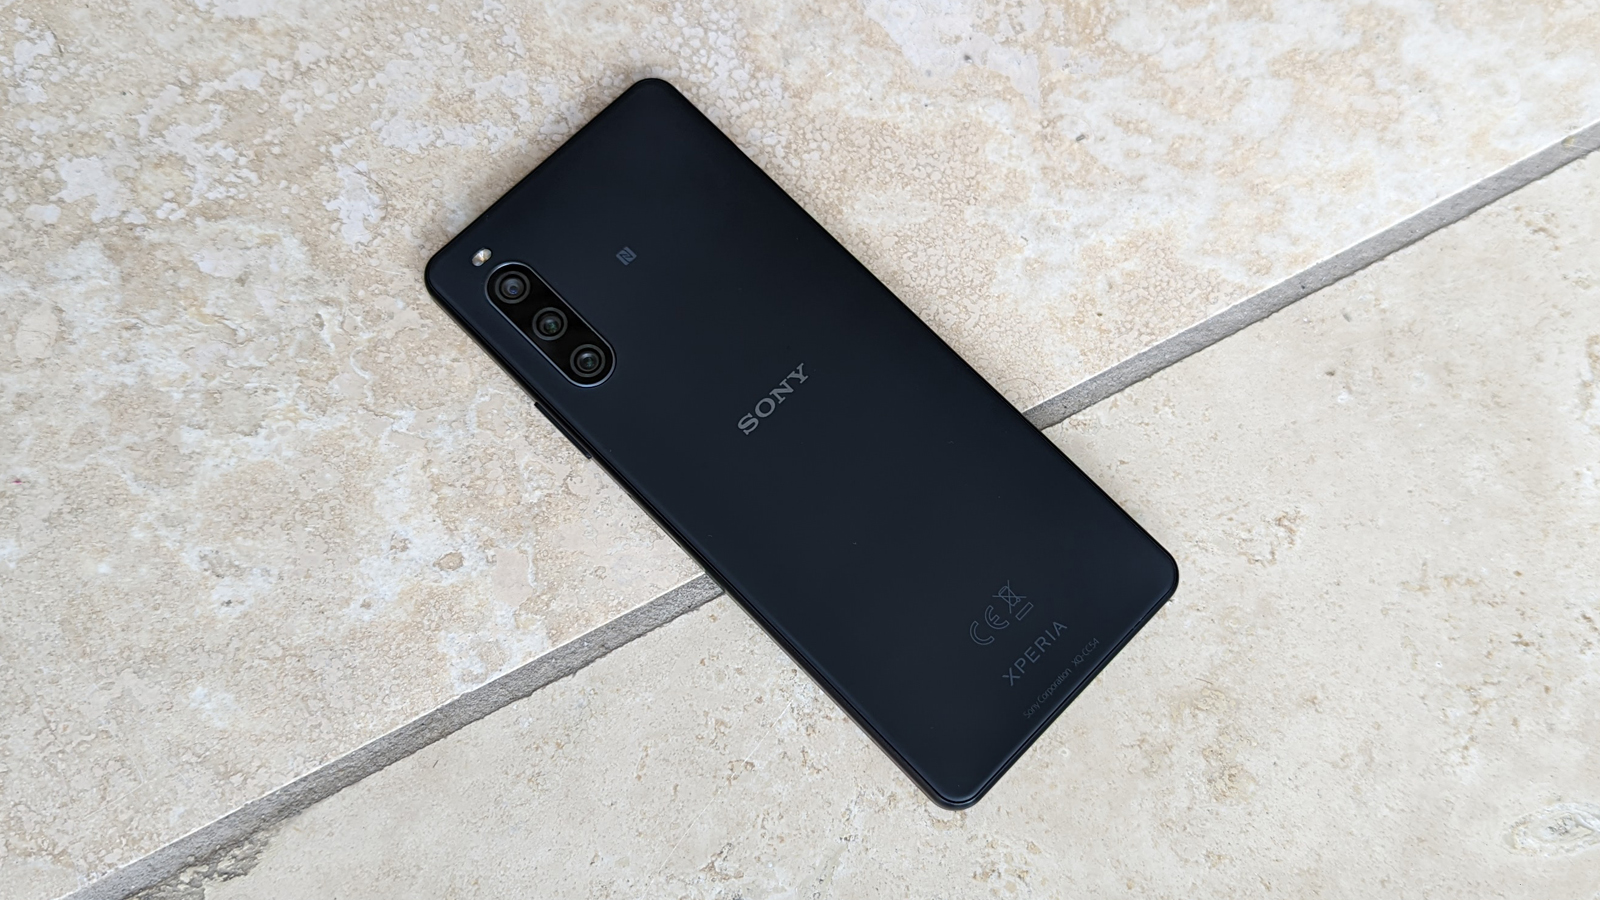 The Sony Xperia 10 IV in black face down on a tiled floor